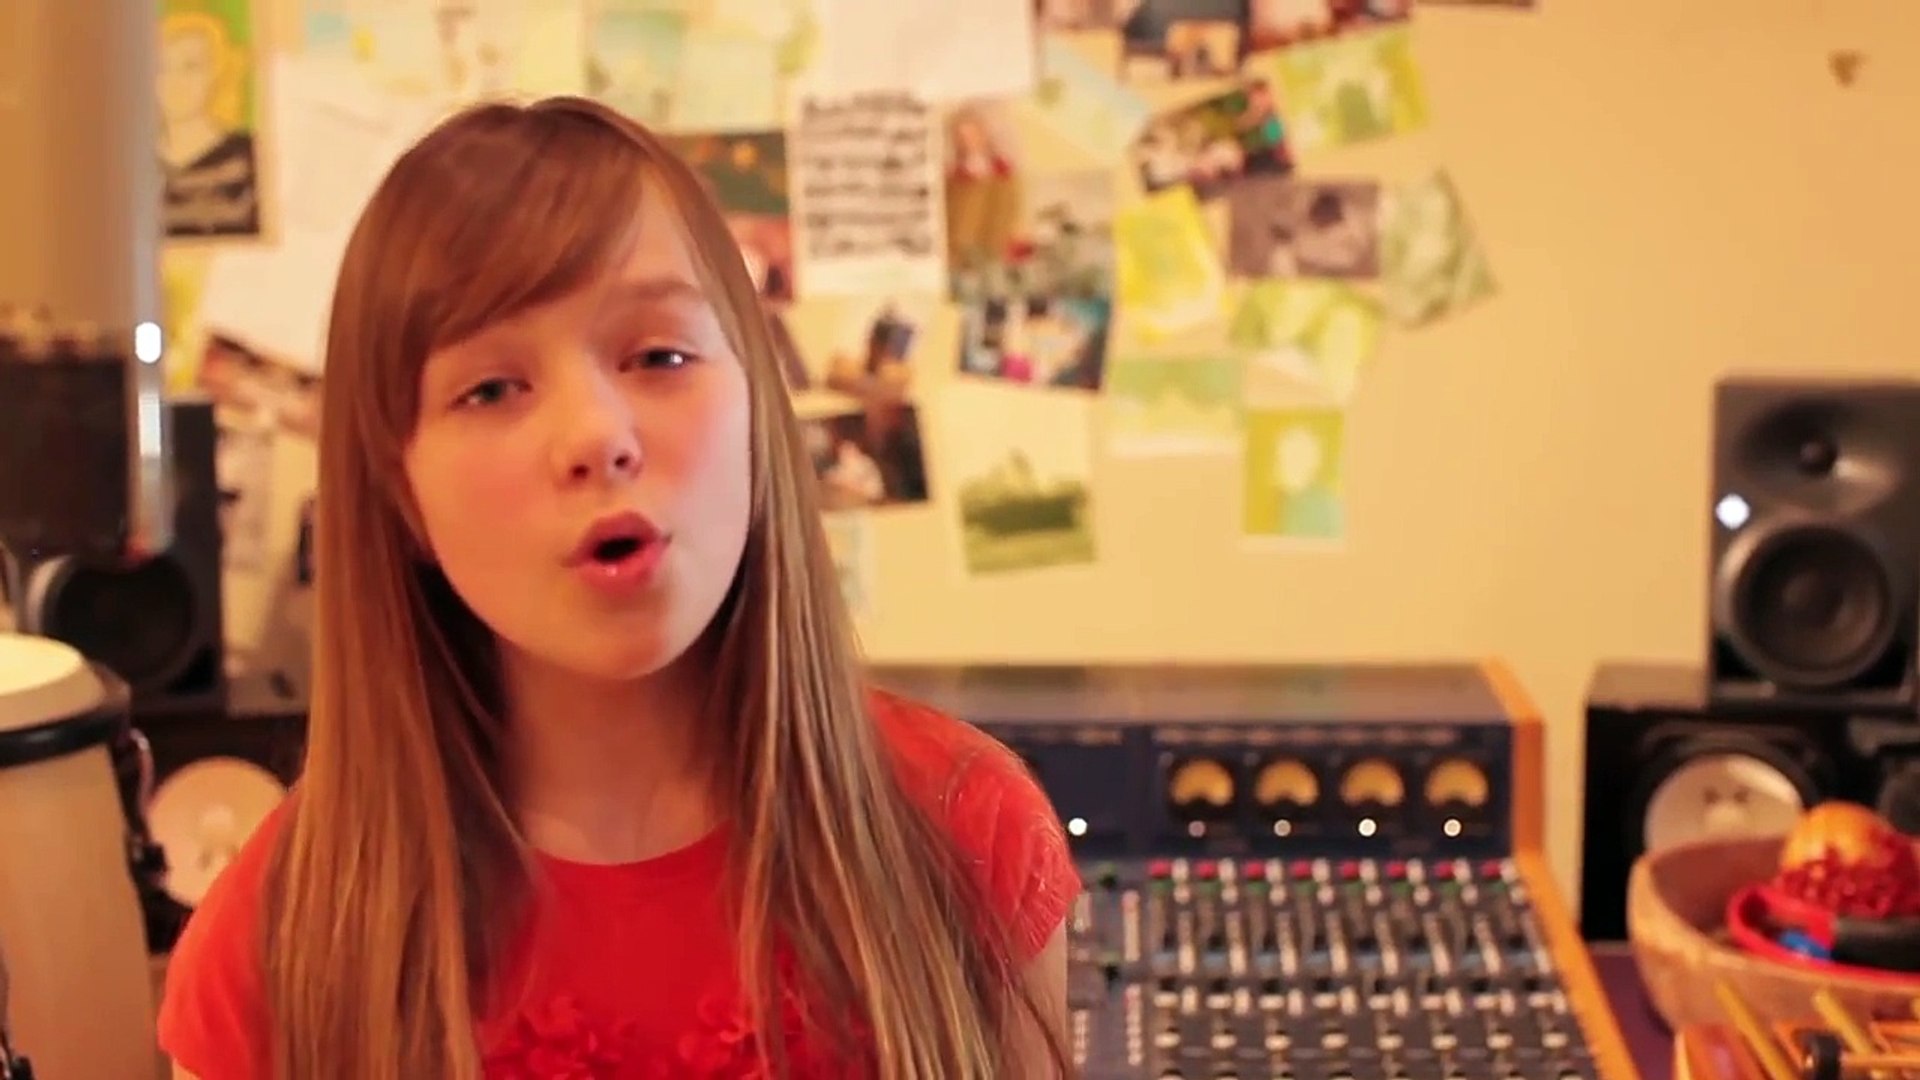 Count On Me - Connie Talbot 